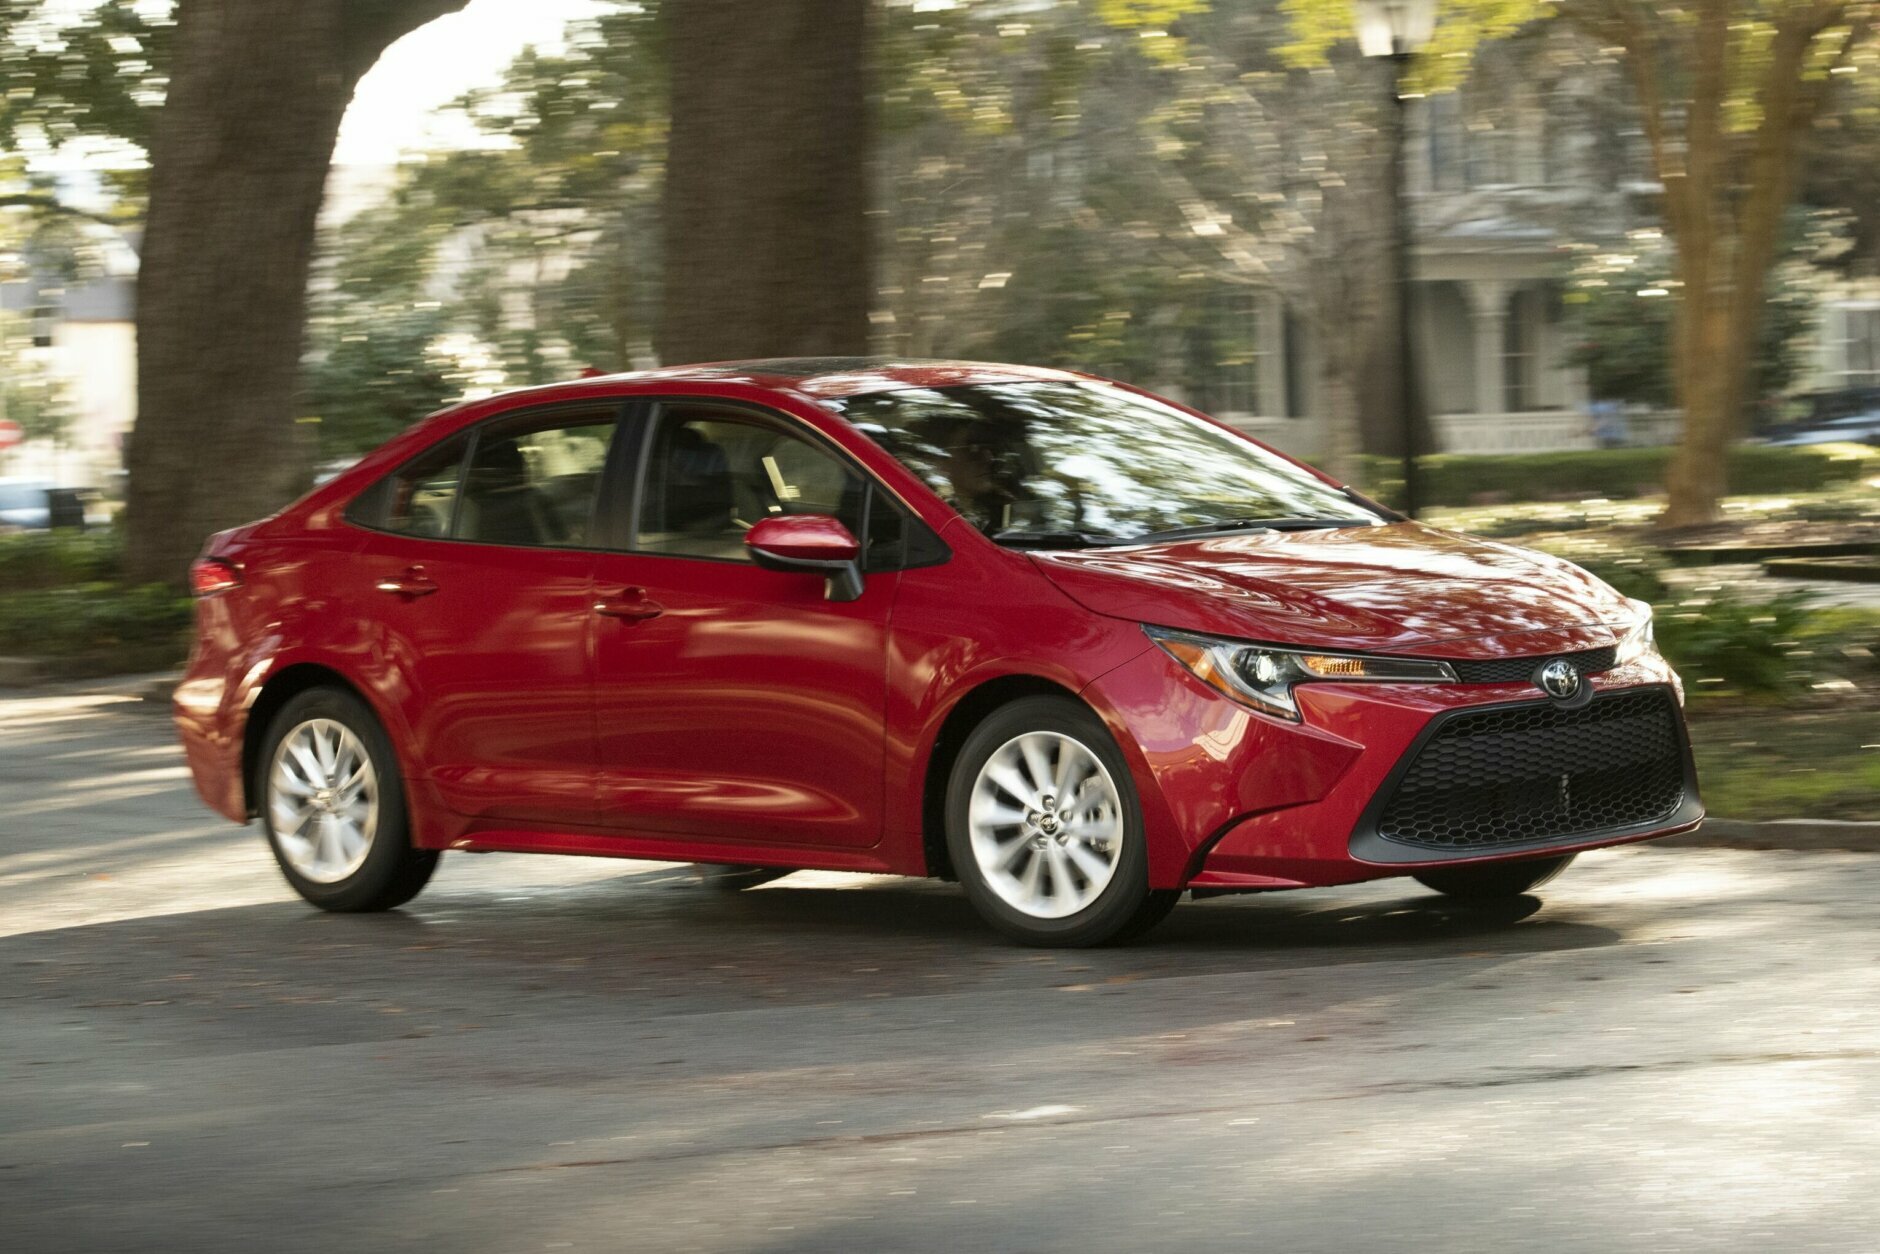 <p><strong>The new best car for teens between $20,000 and $25,000:</strong> The Toyota Corolla</p>
<p>“This is another classic first car, because it is so reliable,&#8221; Page Deaton said. &#8220;Very good crash test scores; has all of the safety features.”</p>
<p>It may be unassuming, but that’s part of the appeal: “You really don&#8217;t want to give your teen a car that&#8217;s going to tempt them to drive beyond their skills. The Corolla is great because it&#8217;s safe, comfortable, reliable transportation, that&#8217;s not going to be constantly saying to a new driver, ‘Hey, go a little bit faster.’”</p>
